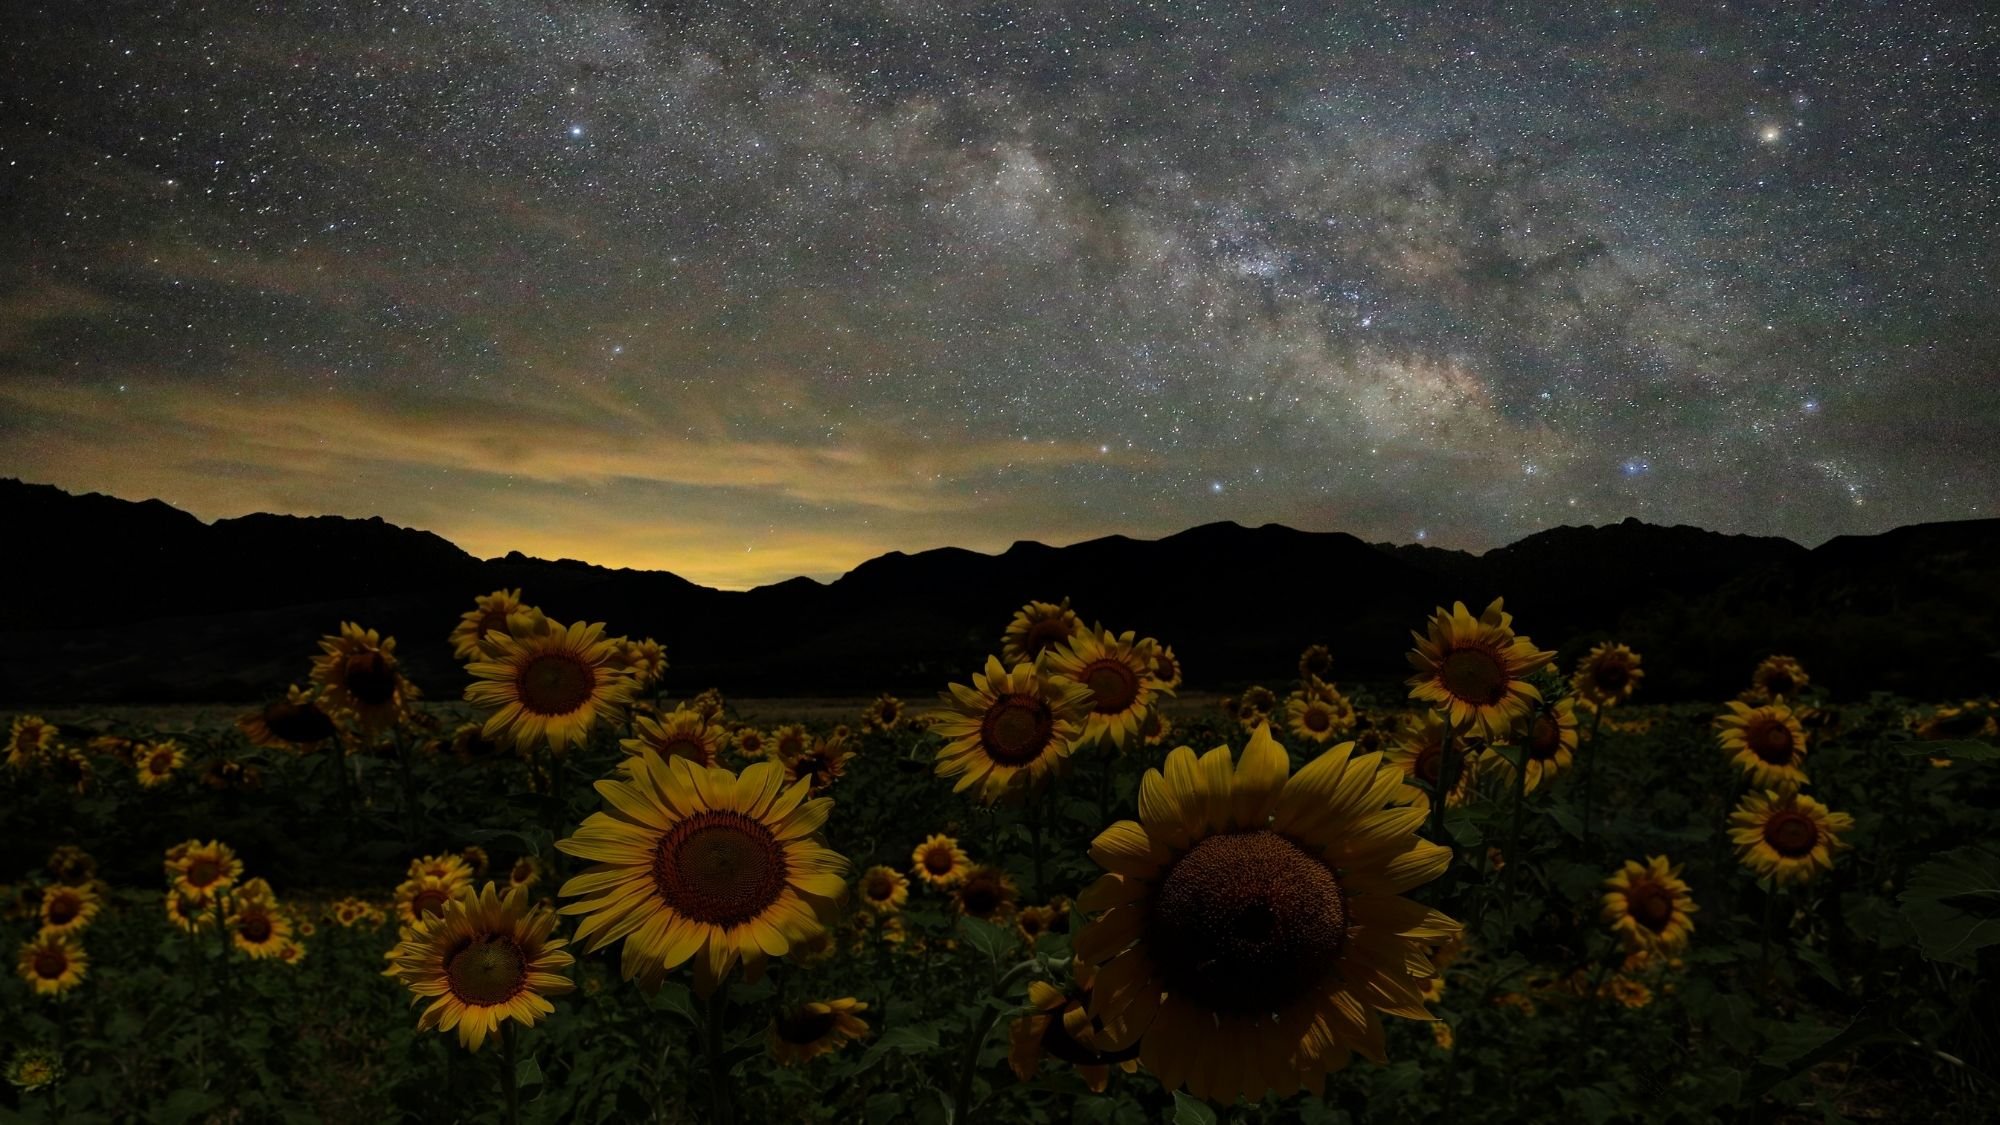 Sunflower field before mountains and under star-filled night sky and distant yellow sunset